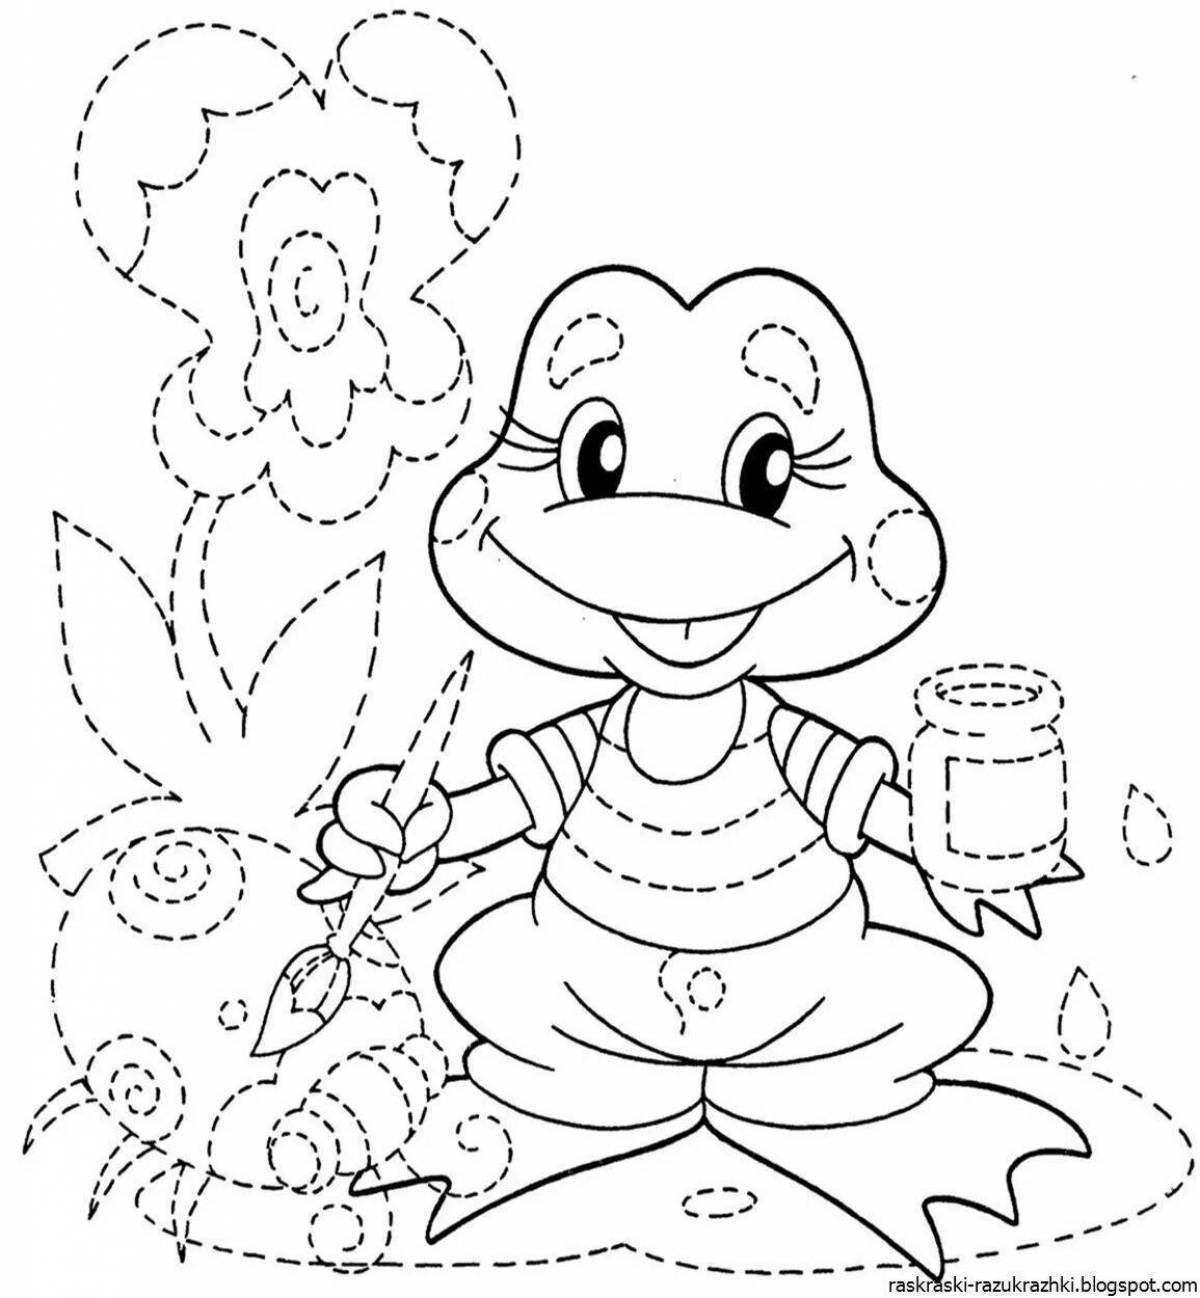 Colorful and fun coloring pdf for kids